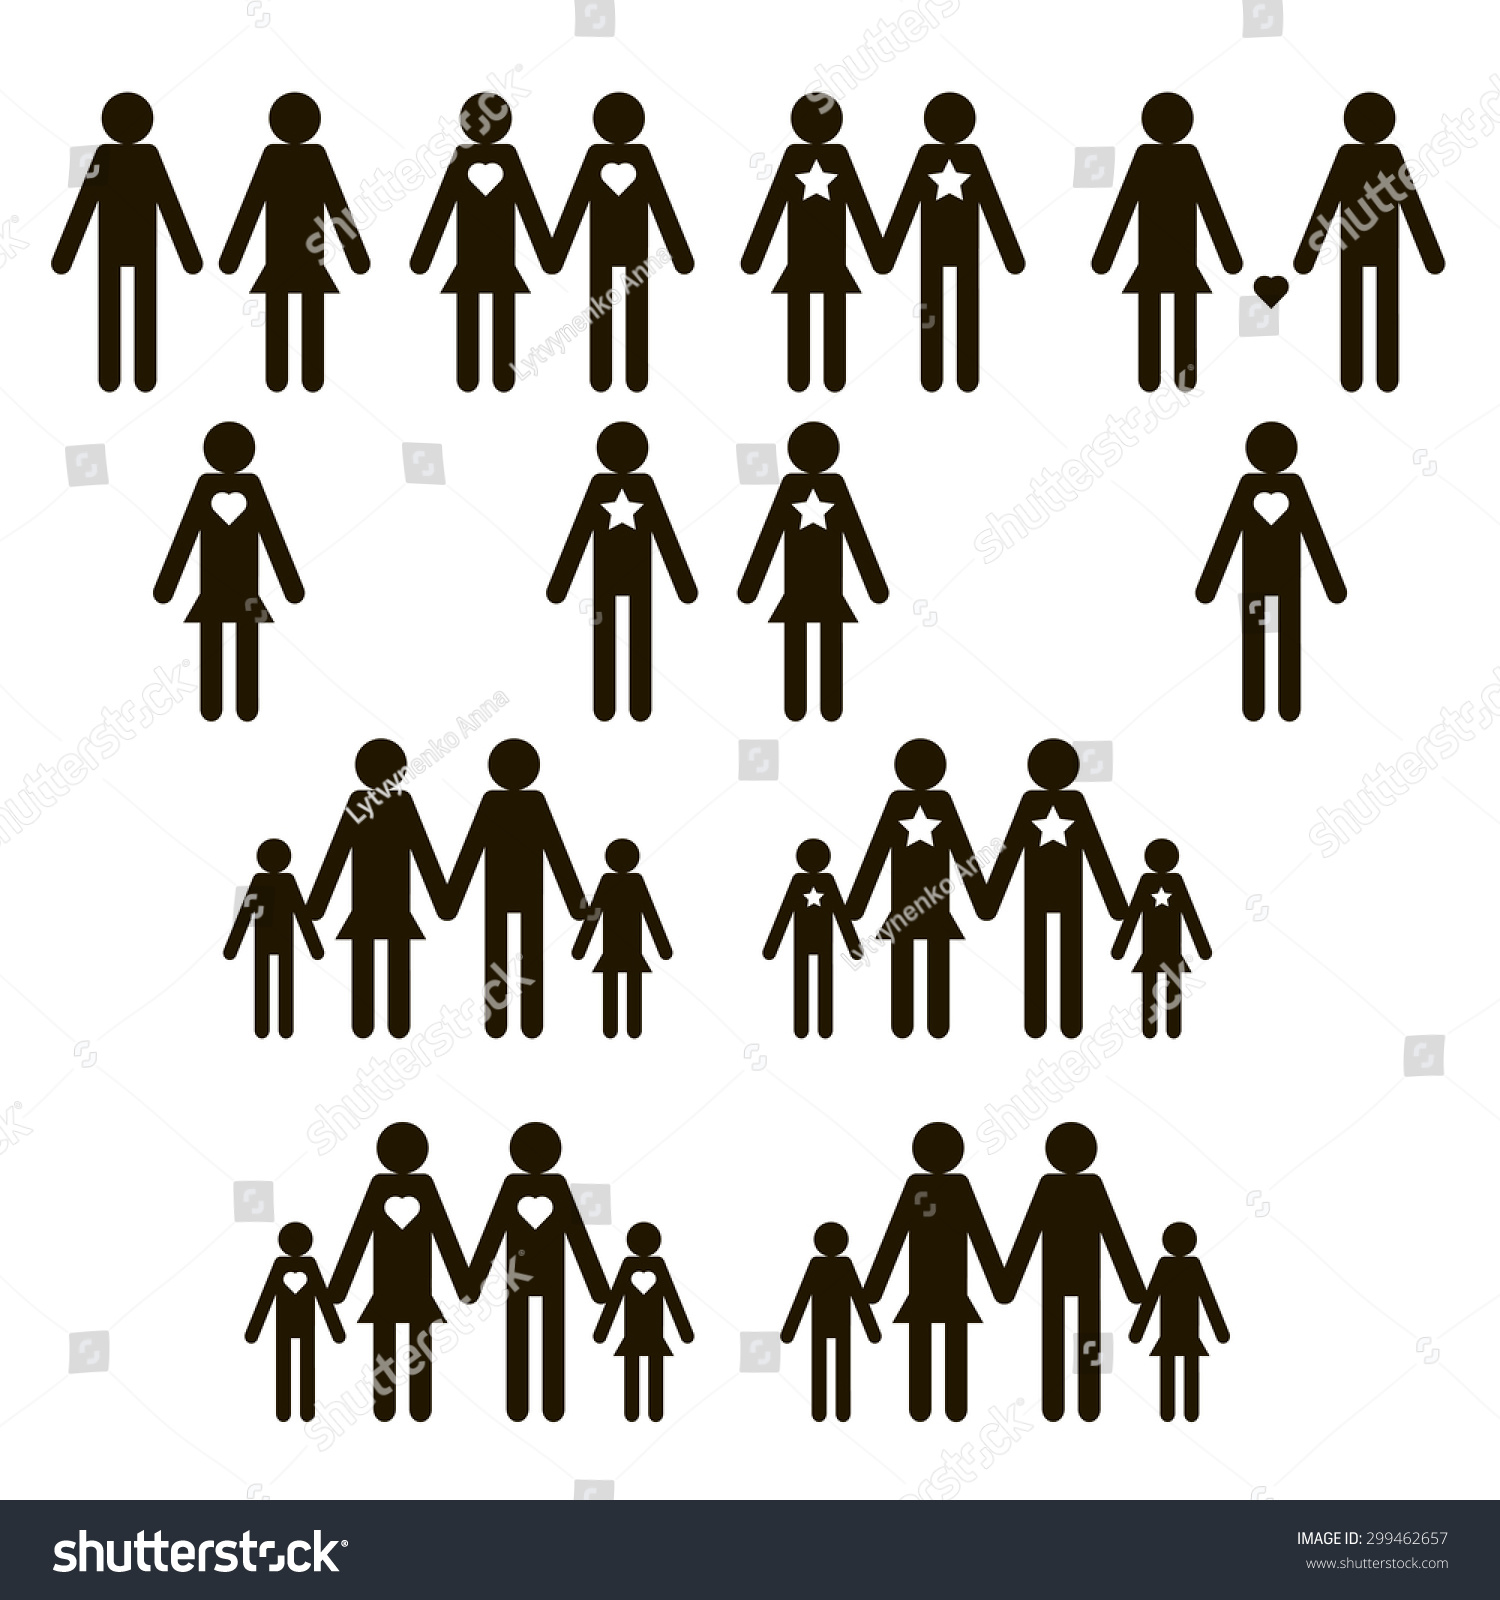 Family Icons Set Vector Stock Vector (Royalty Free) 299462657